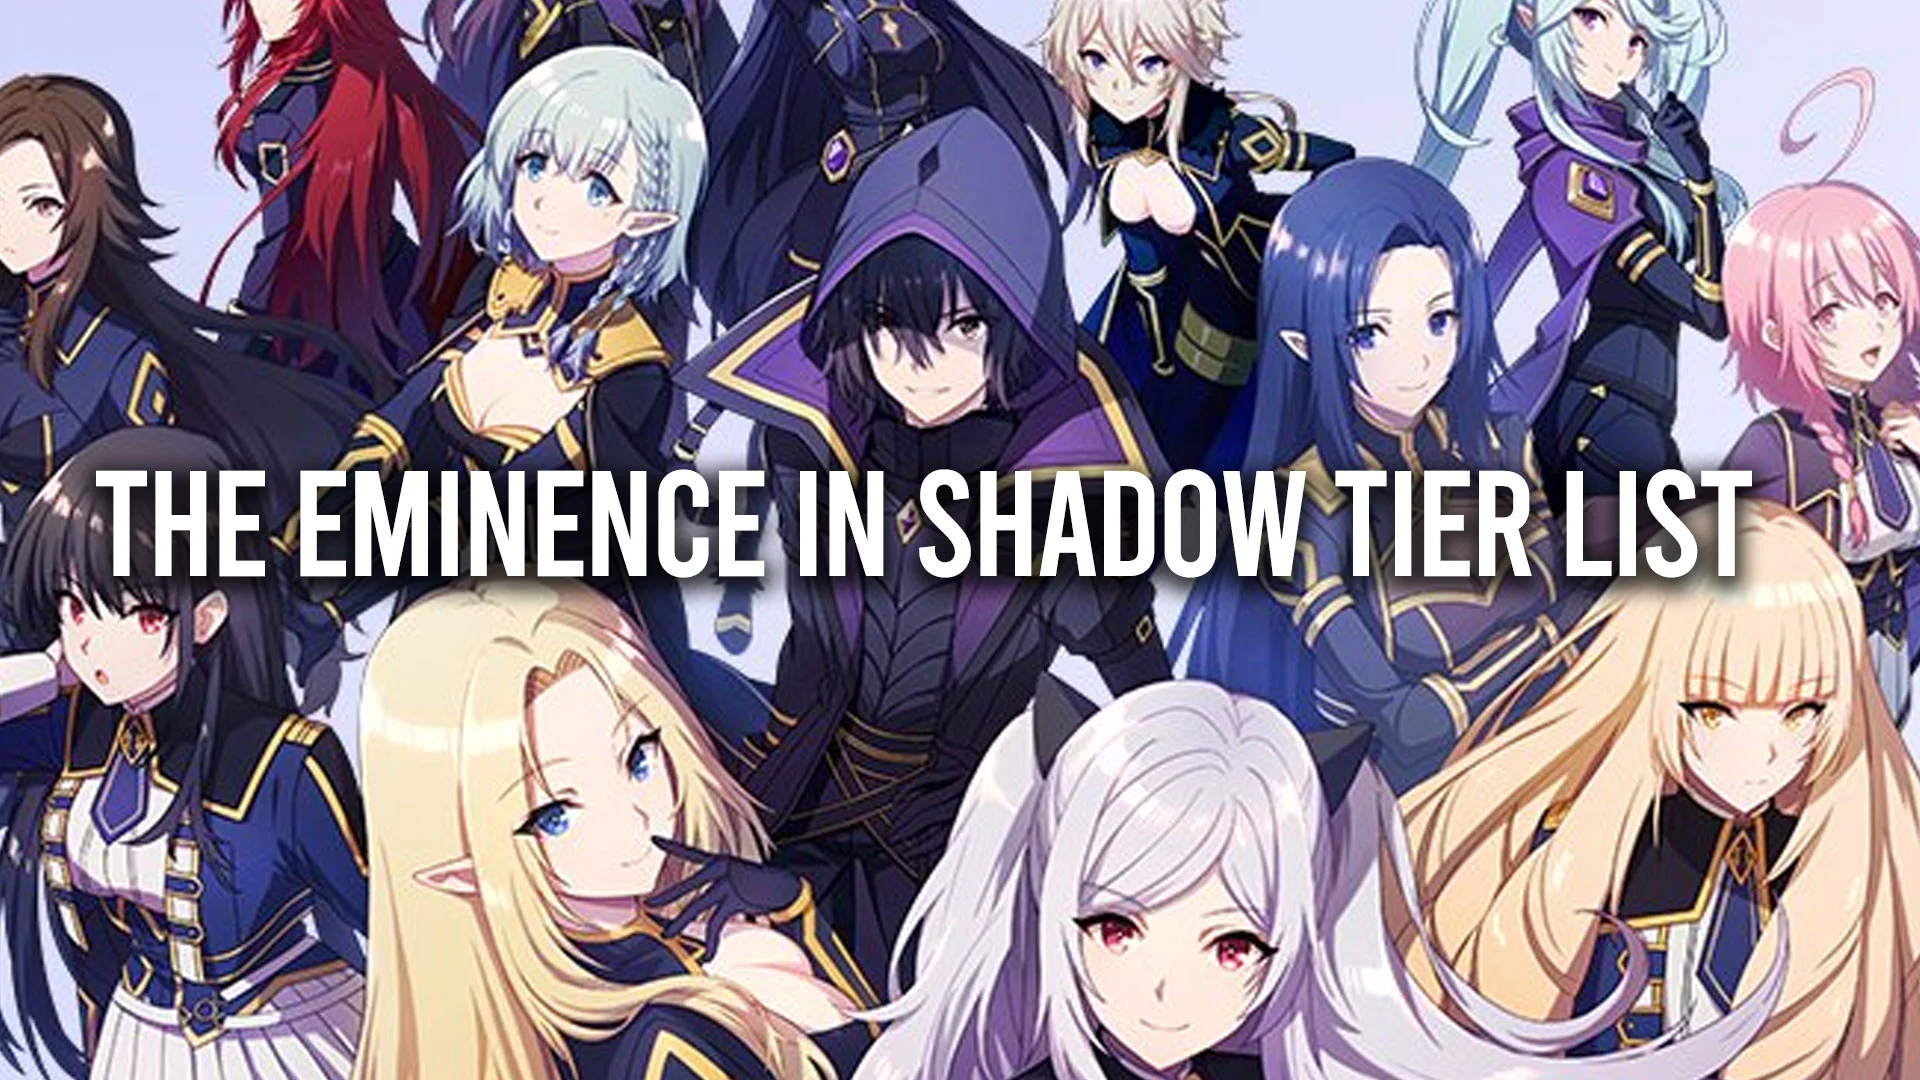 The Eminence in Shadow Tier List